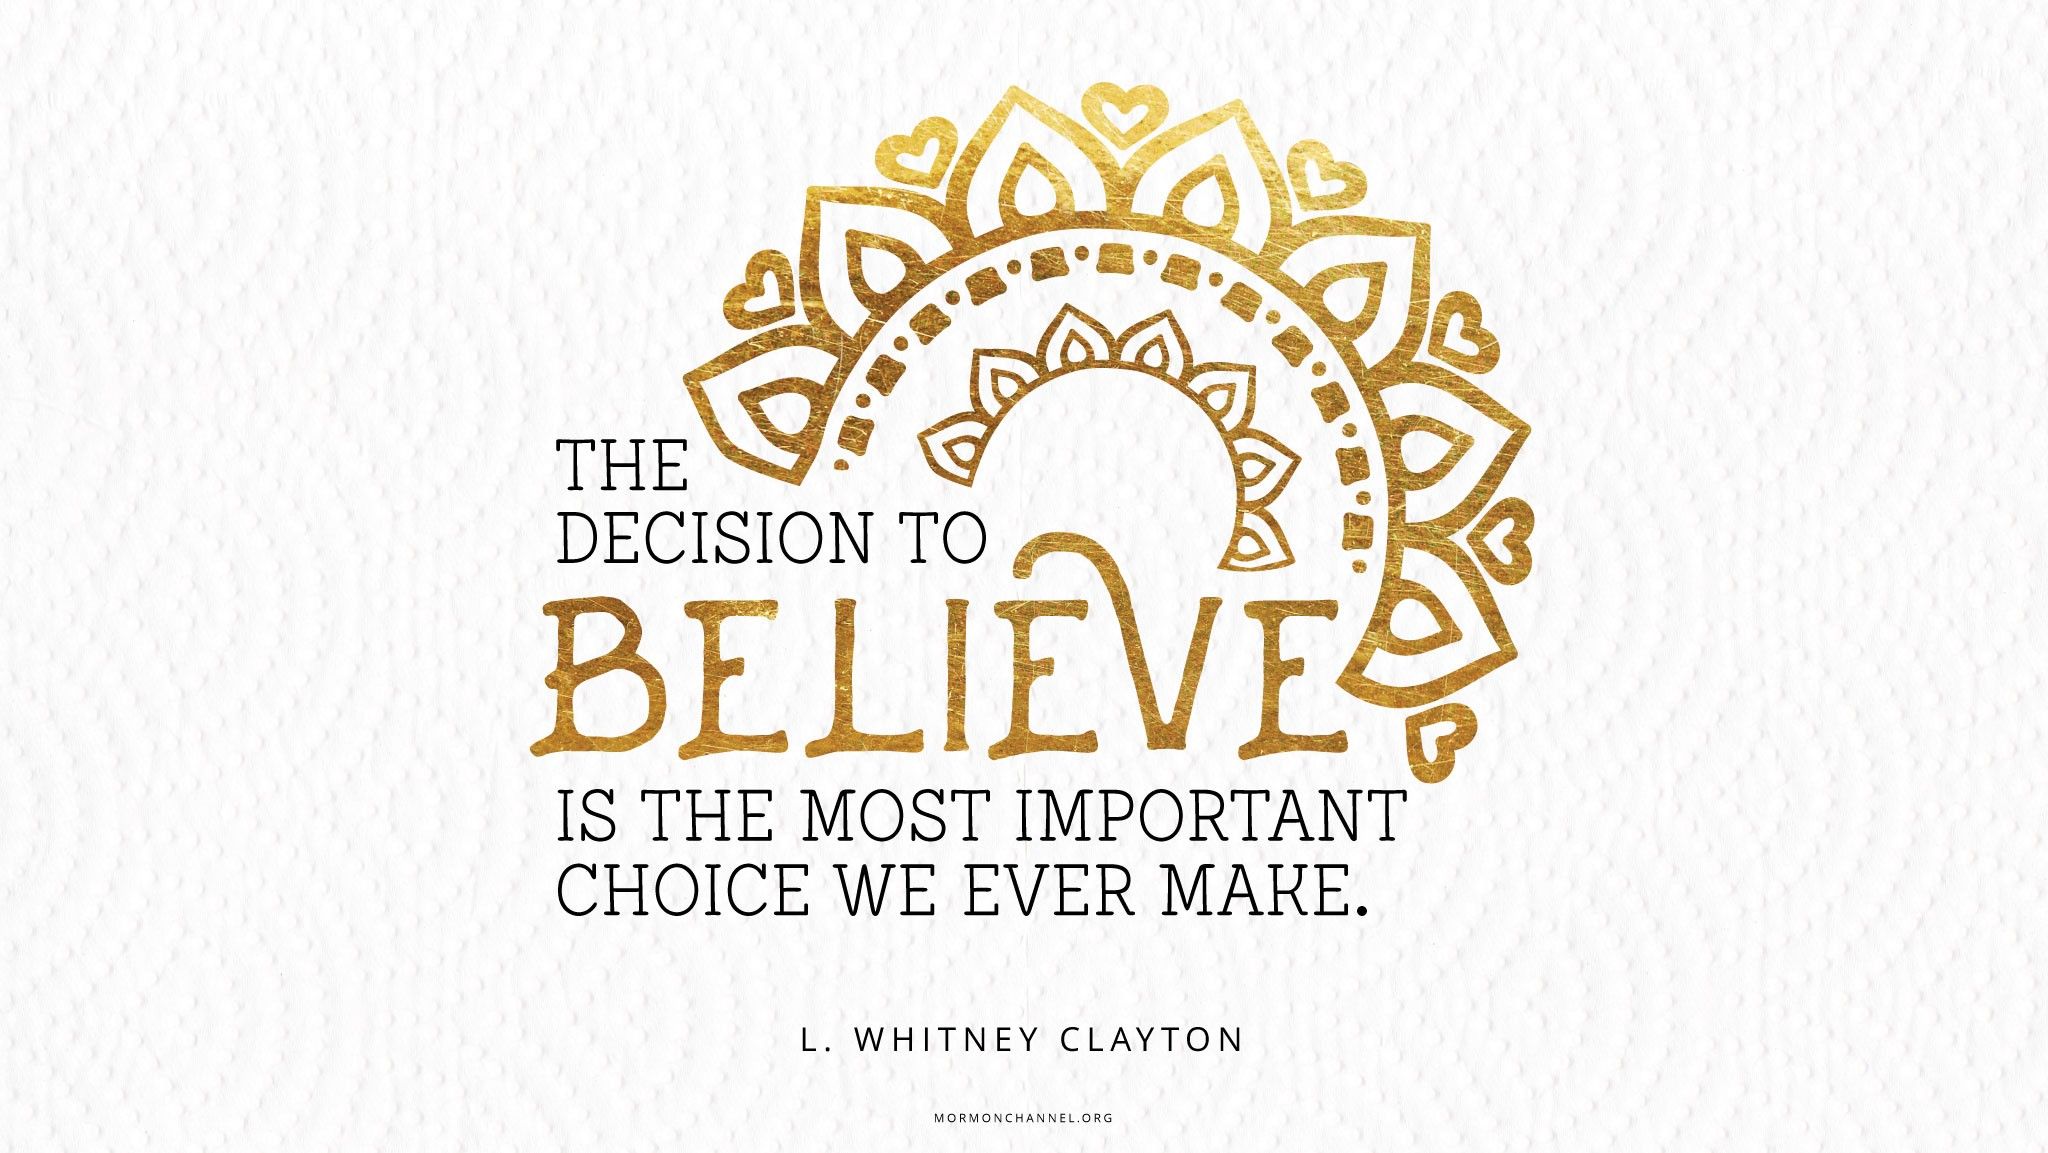 “The decision to believe is the most important choice we ever make.”—Elder L. Whitney Clayton, “Choose to Believe”